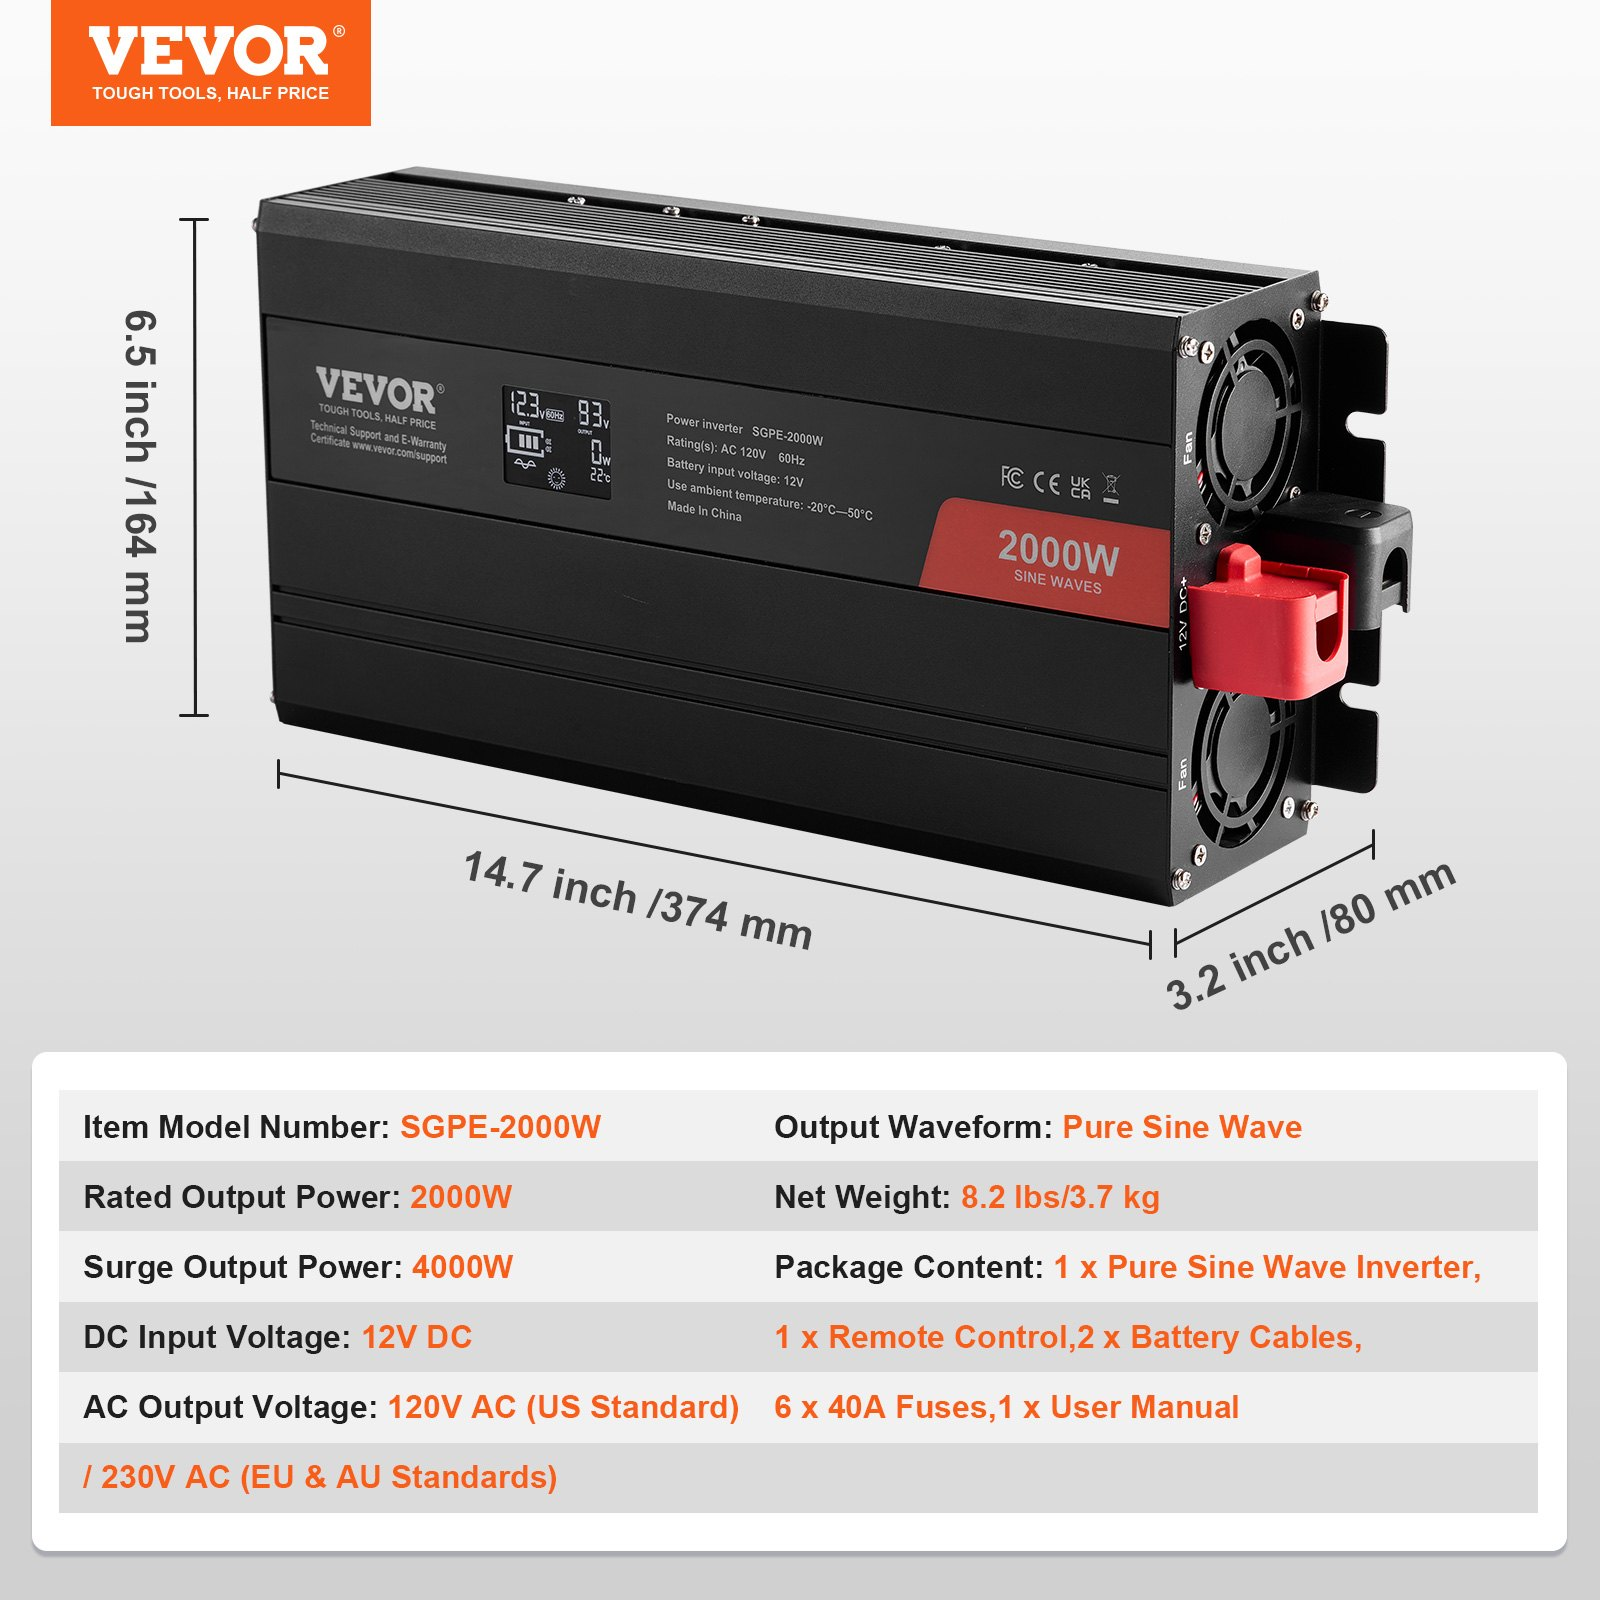 VEVOR Pure Sine Wave Inverter, 2000 Watt, DC 12V to AC 120V Power Inverter with 2 AC Outlets 2 USB Port 1 Type-C Port, LCD Display and Remote Controller for Medium-Sized Household Equipment, CE FCC, Goodies N Stuff